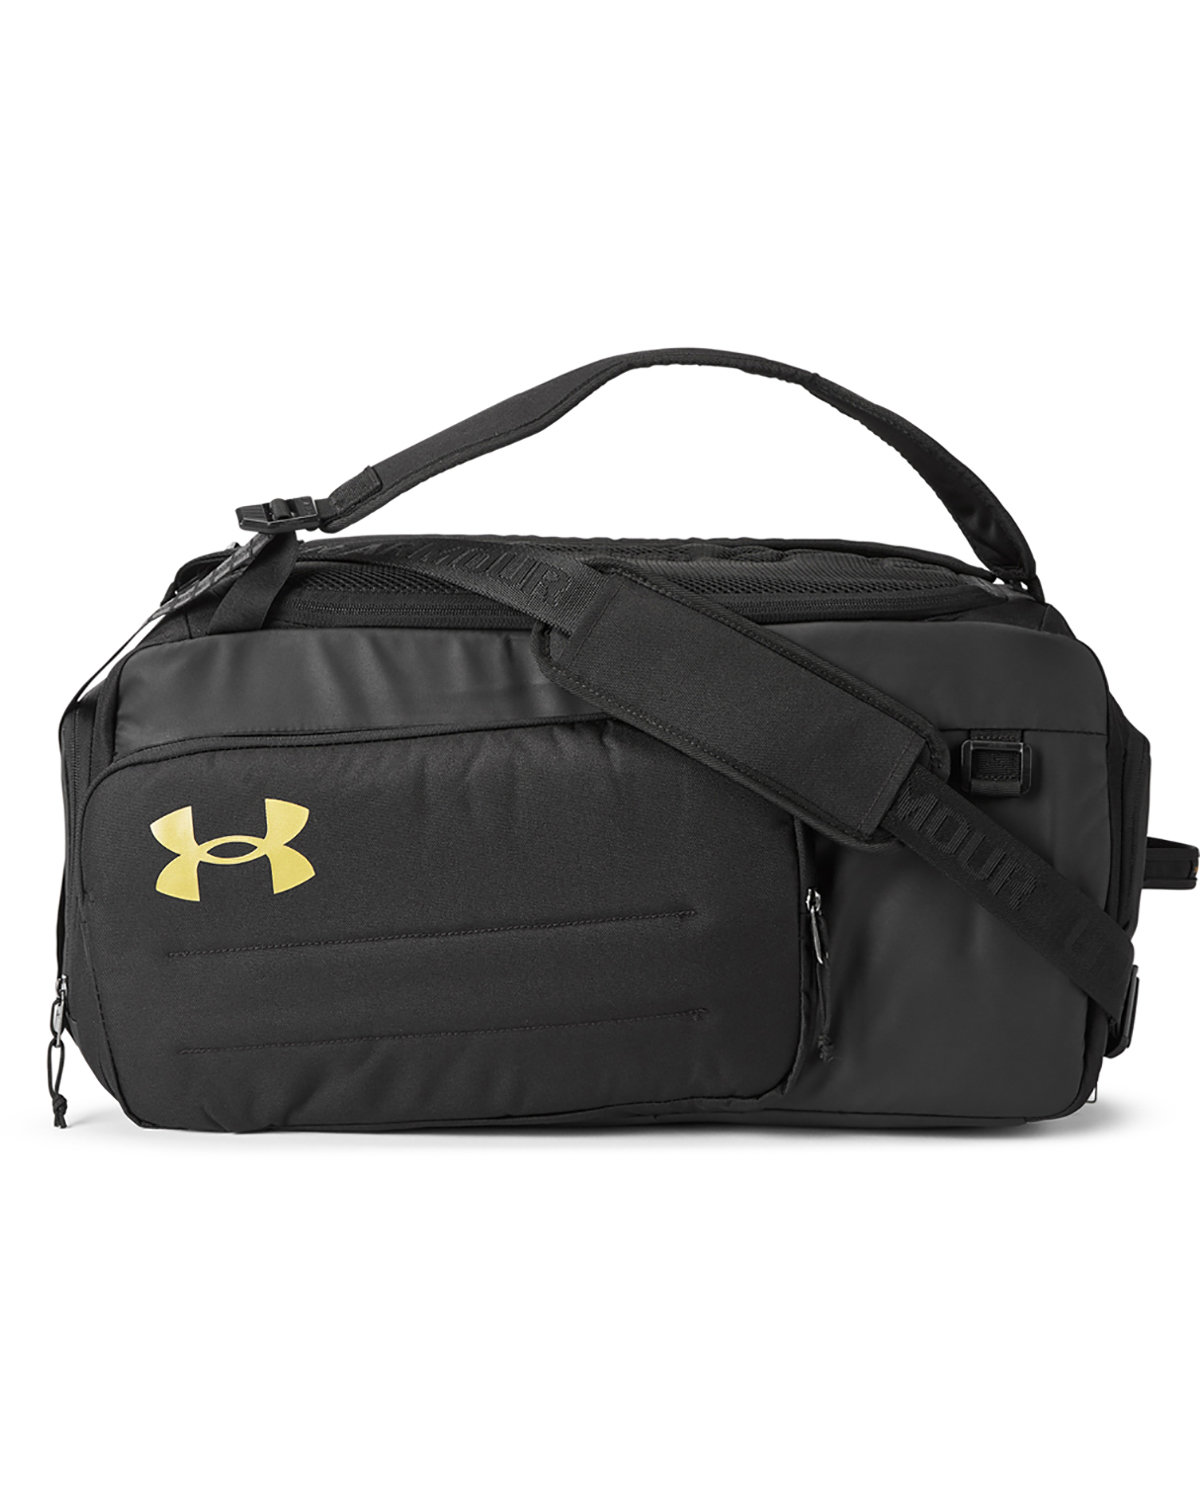 Buy/Shop Under Armour Online in PA – Slom's Professional Uniforms